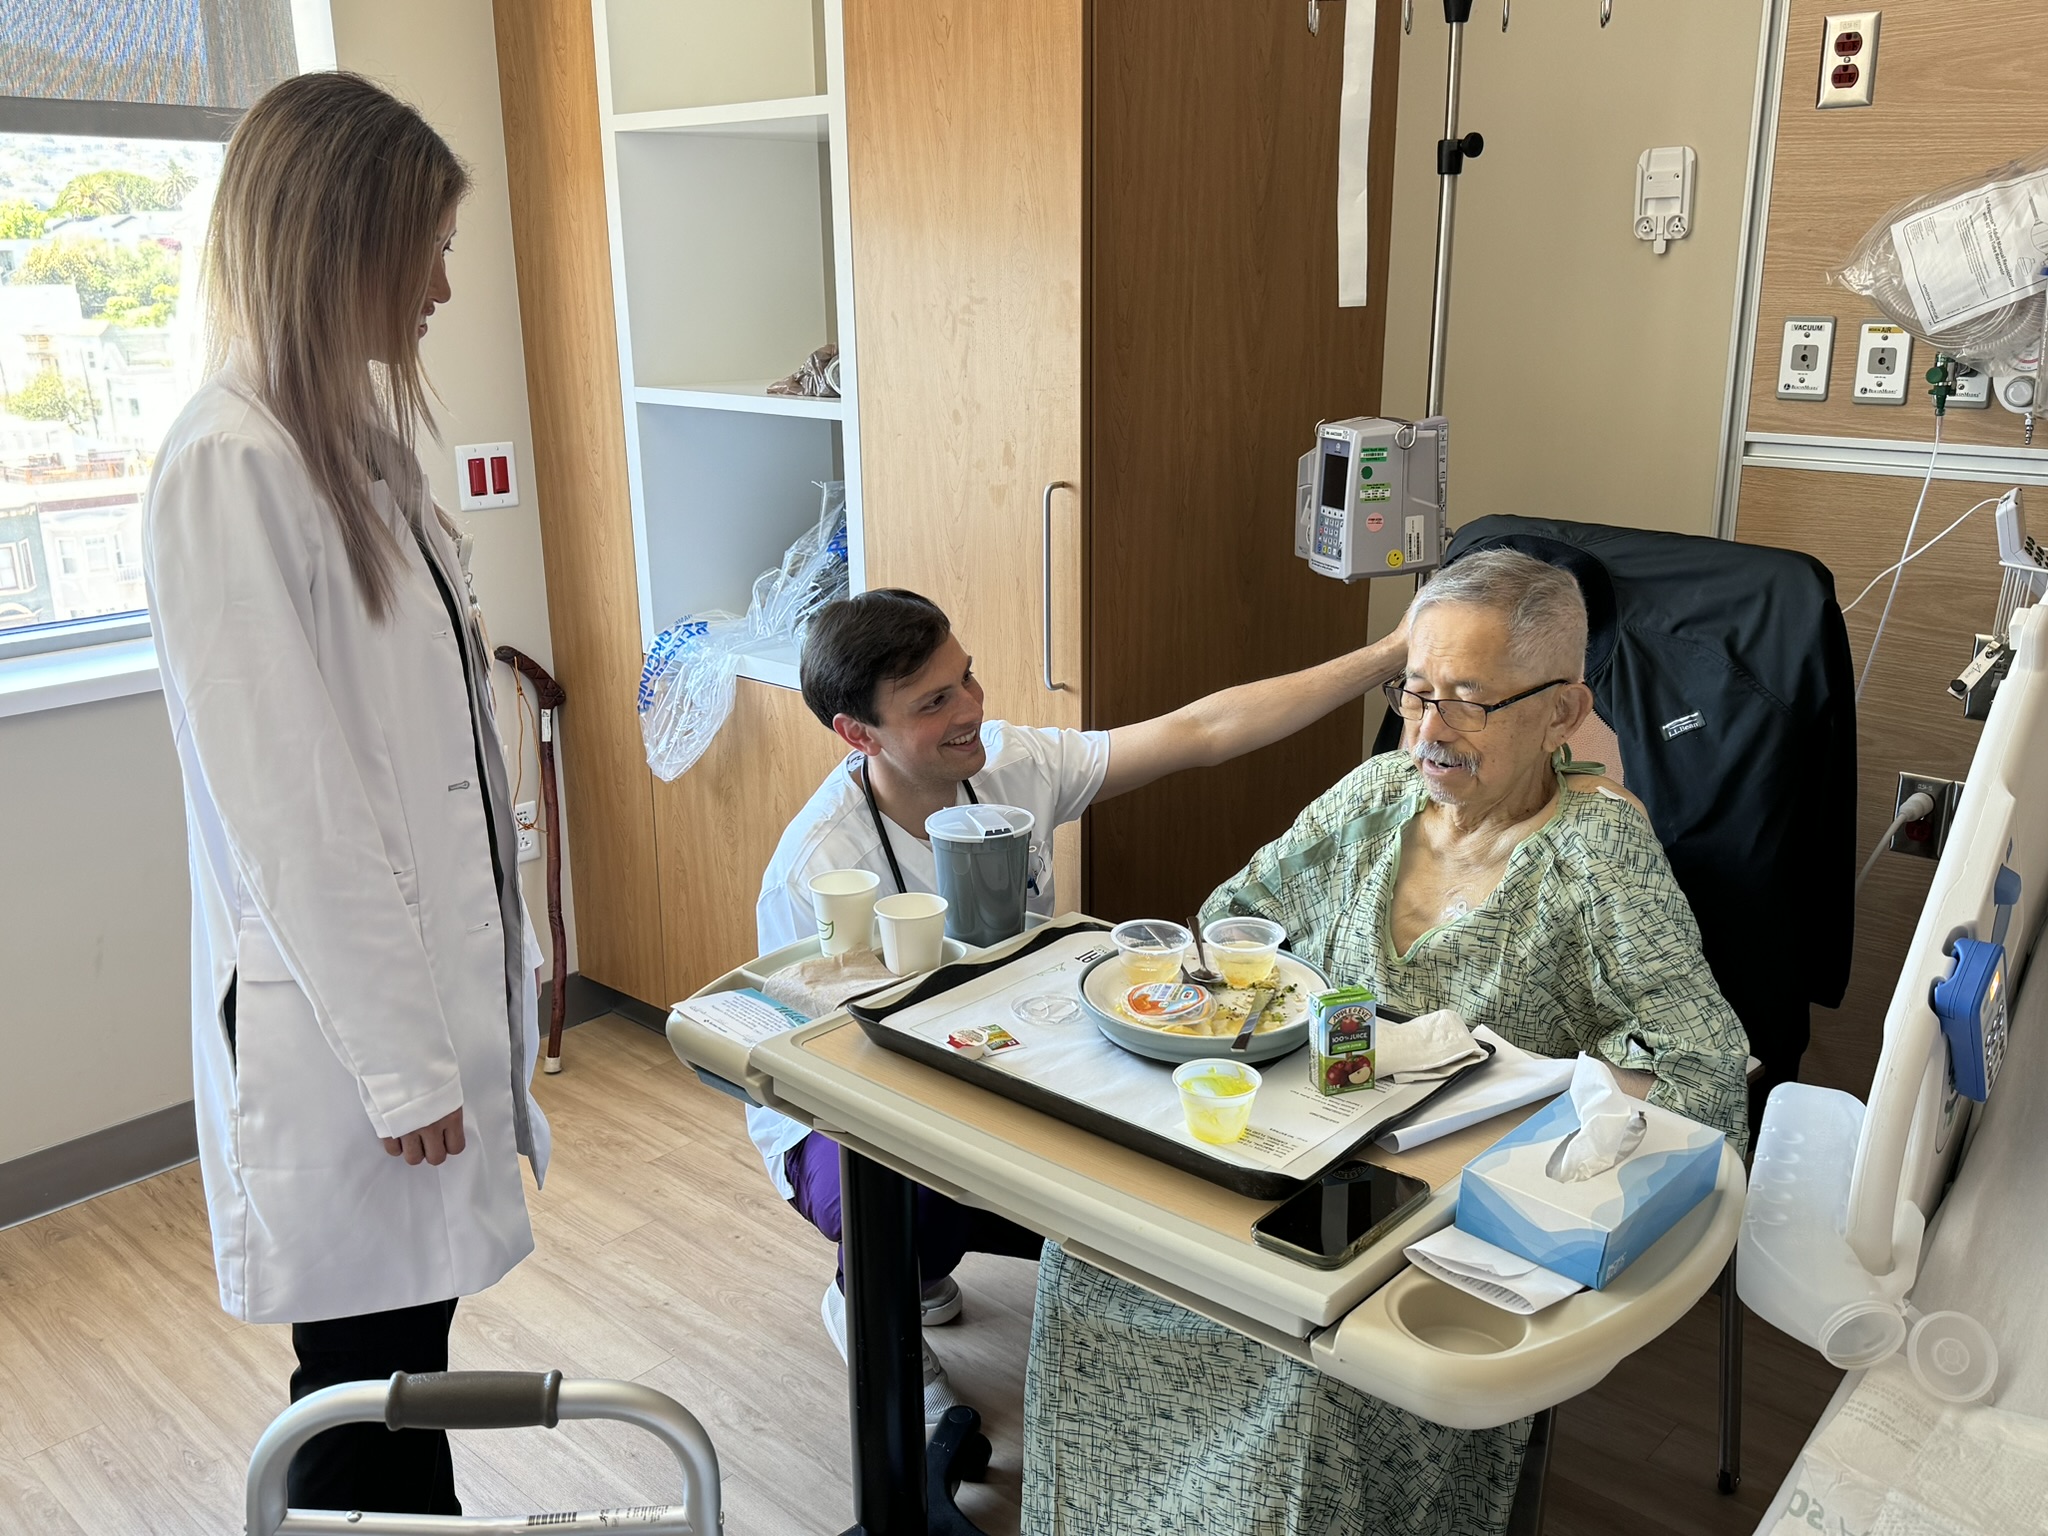 A nurse and nursing student in conversation with a patient